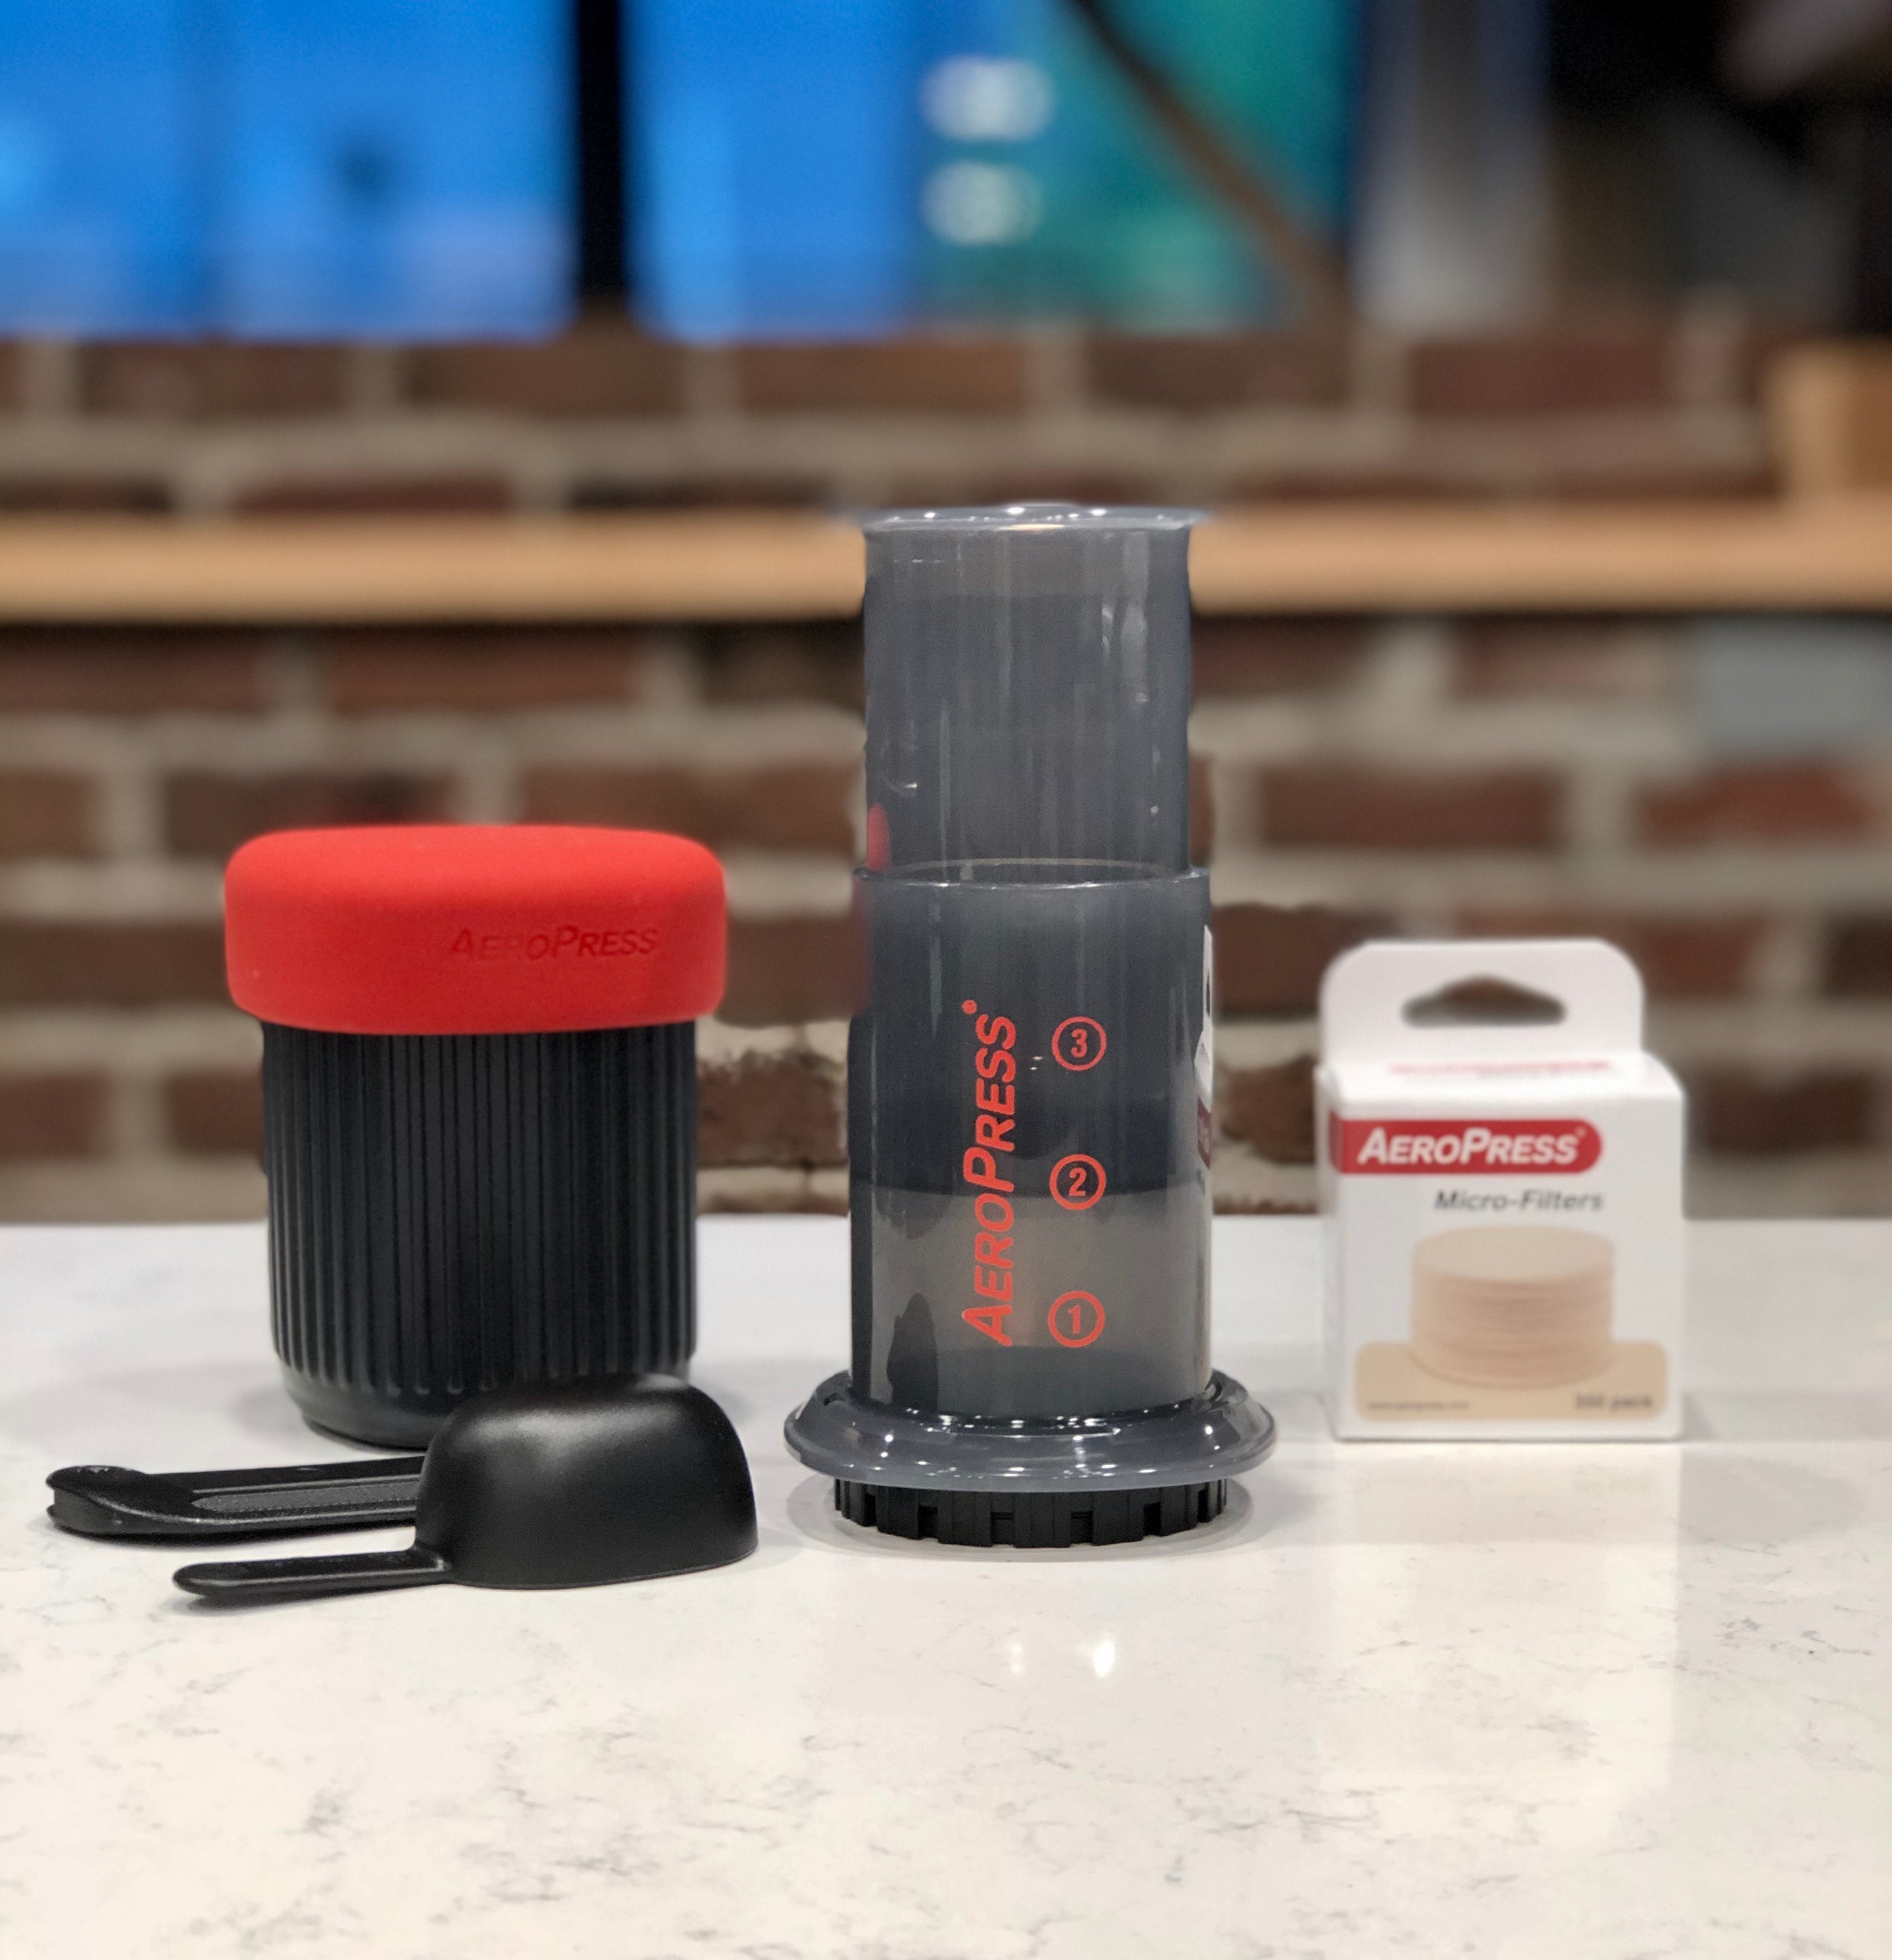 Aeropress Go - What Is It and How to Use it?